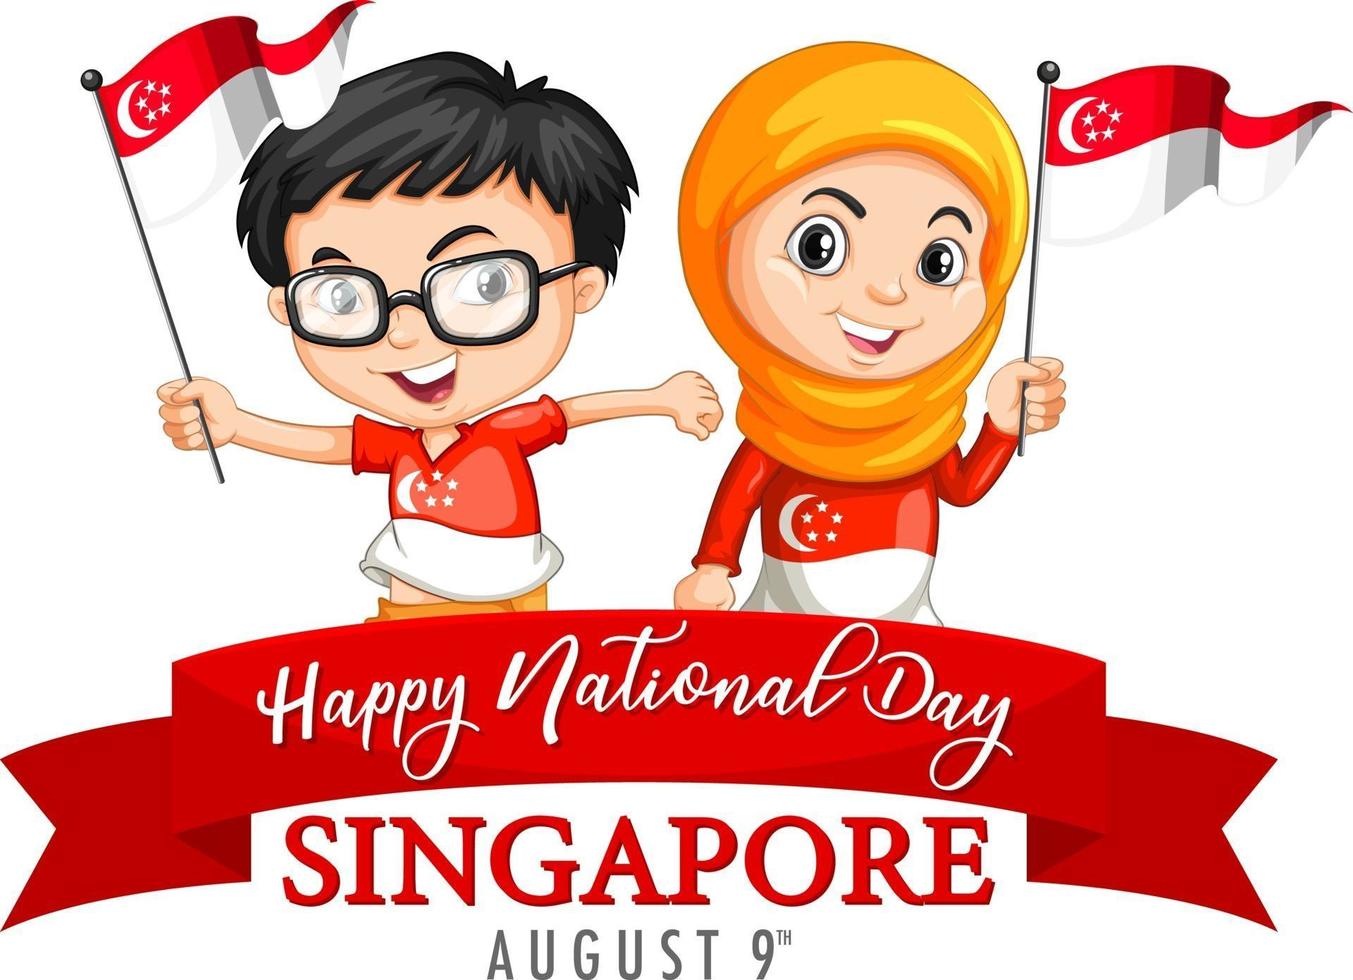 Singapore National Day with children hold Singapore flag cartoon character vector